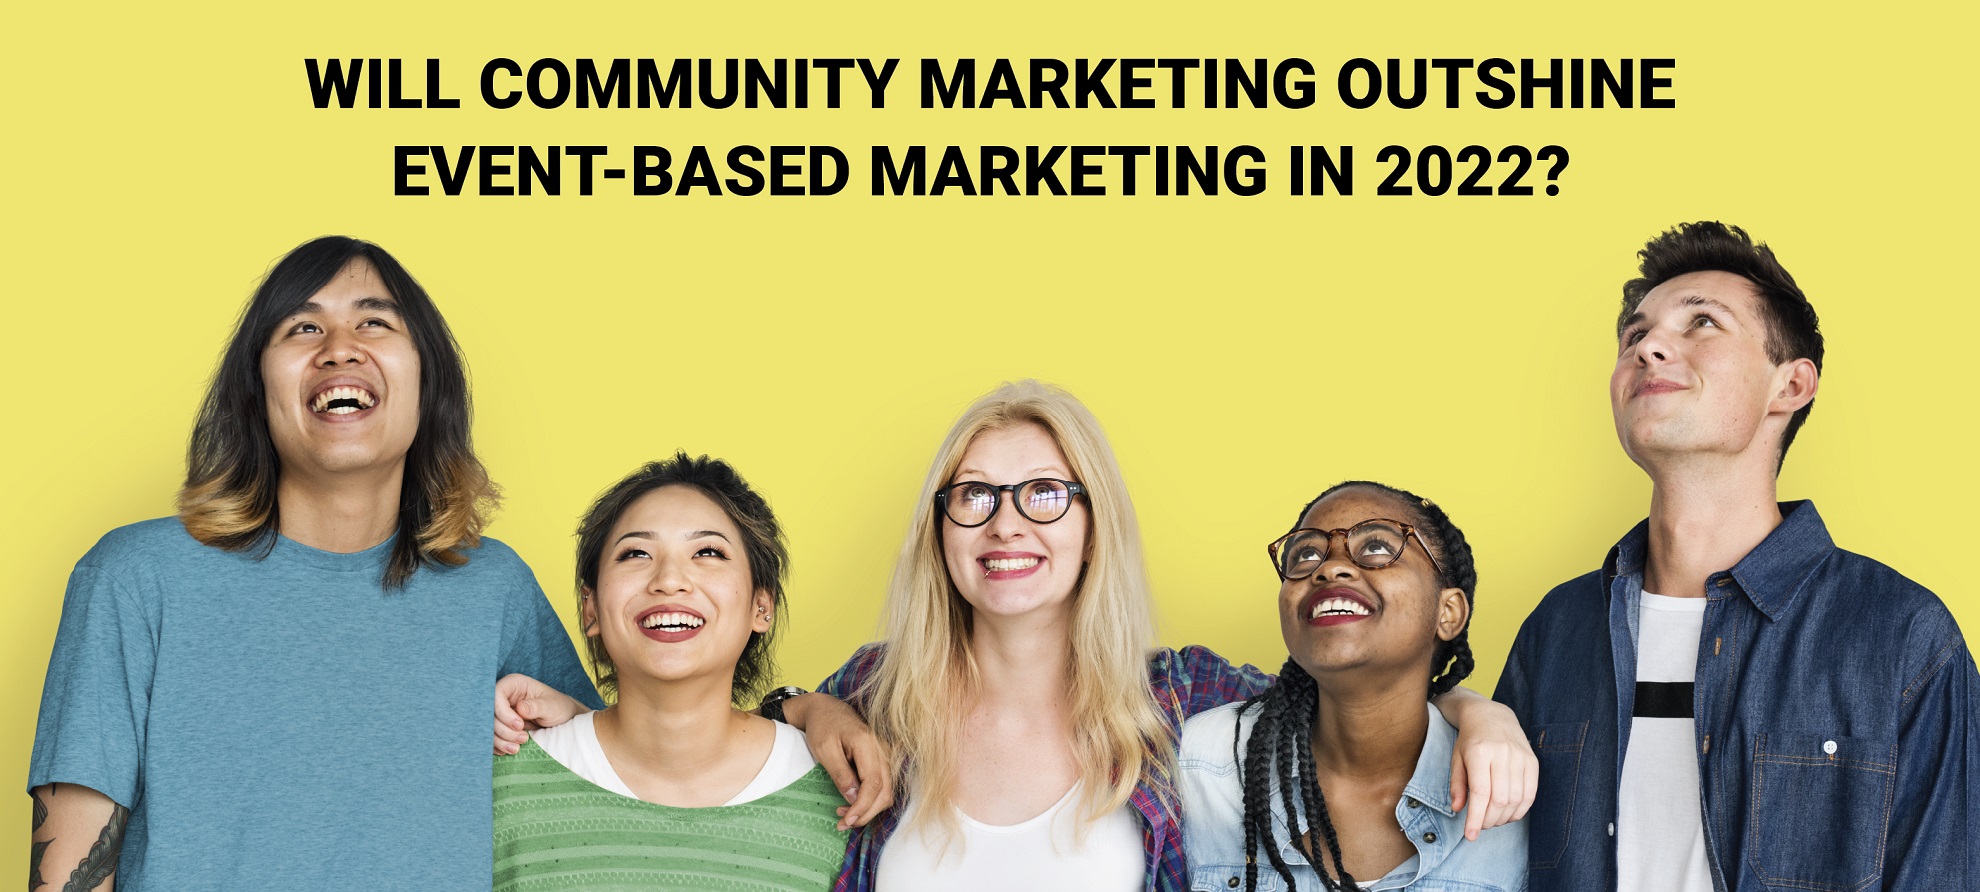 Will Community Marketing Outshine Event-based Marketing in 2022?